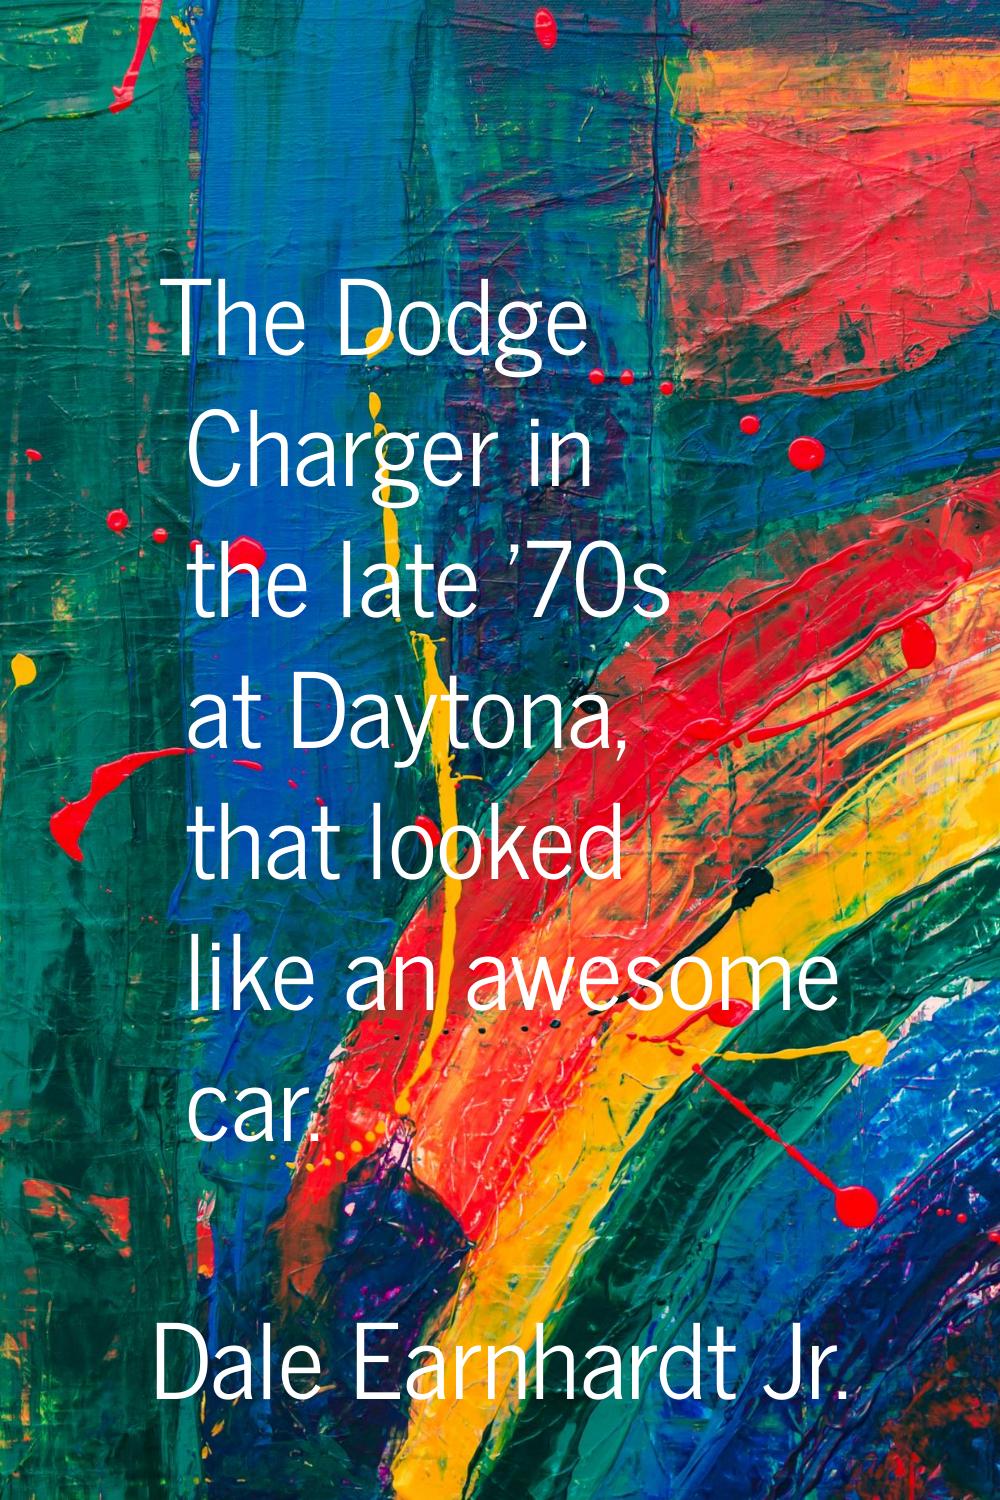 The Dodge Charger in the late '70s at Daytona, that looked like an awesome car.